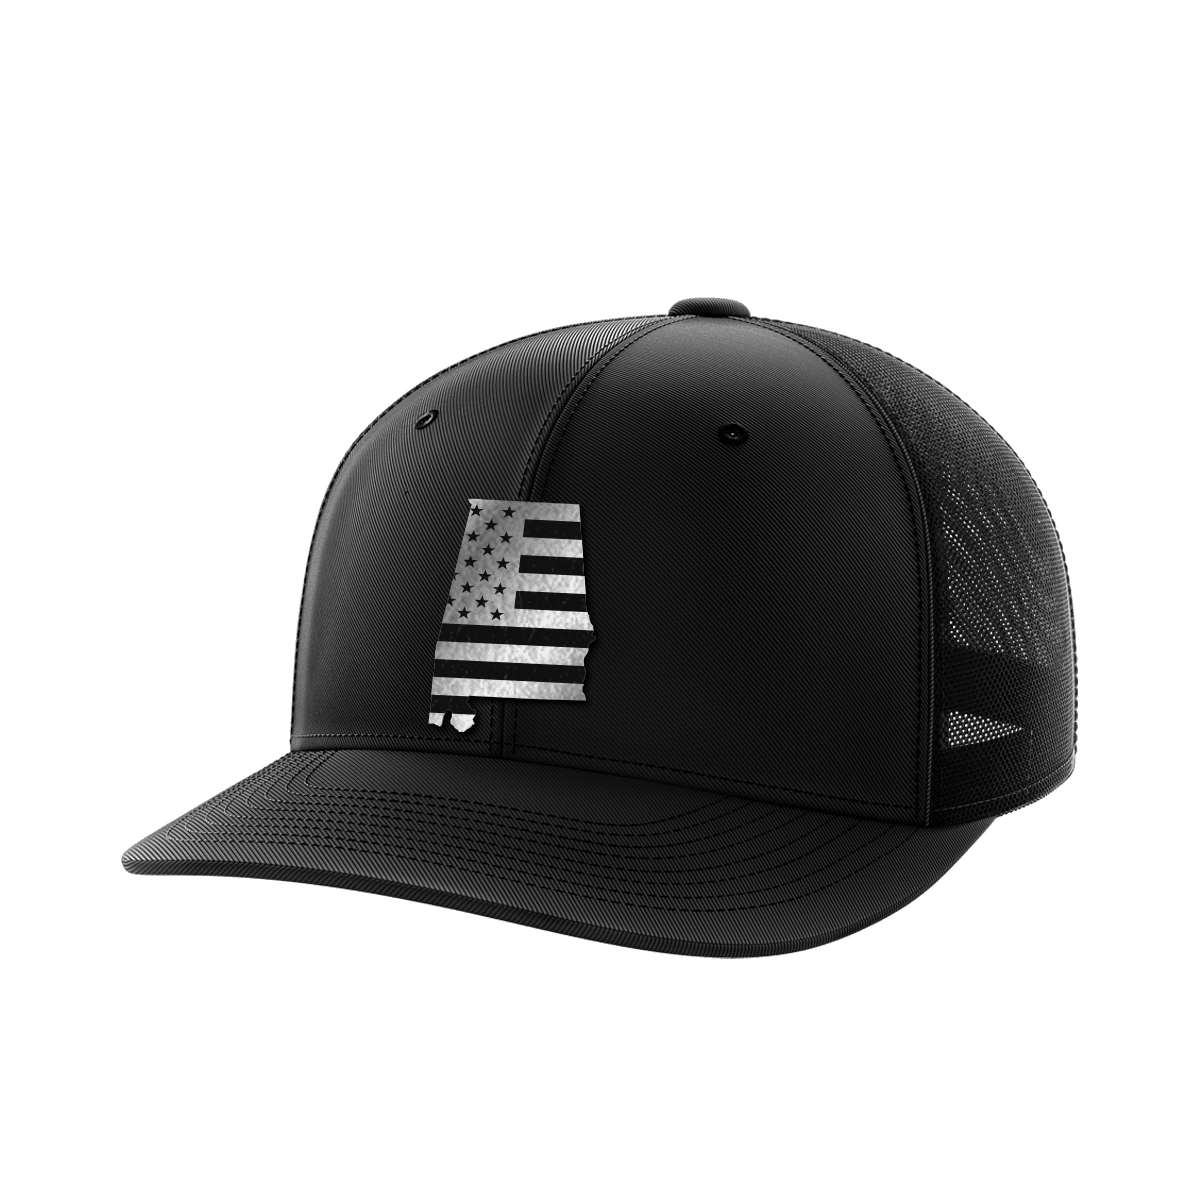 Alabama United Collection (black leather) - Greater Half